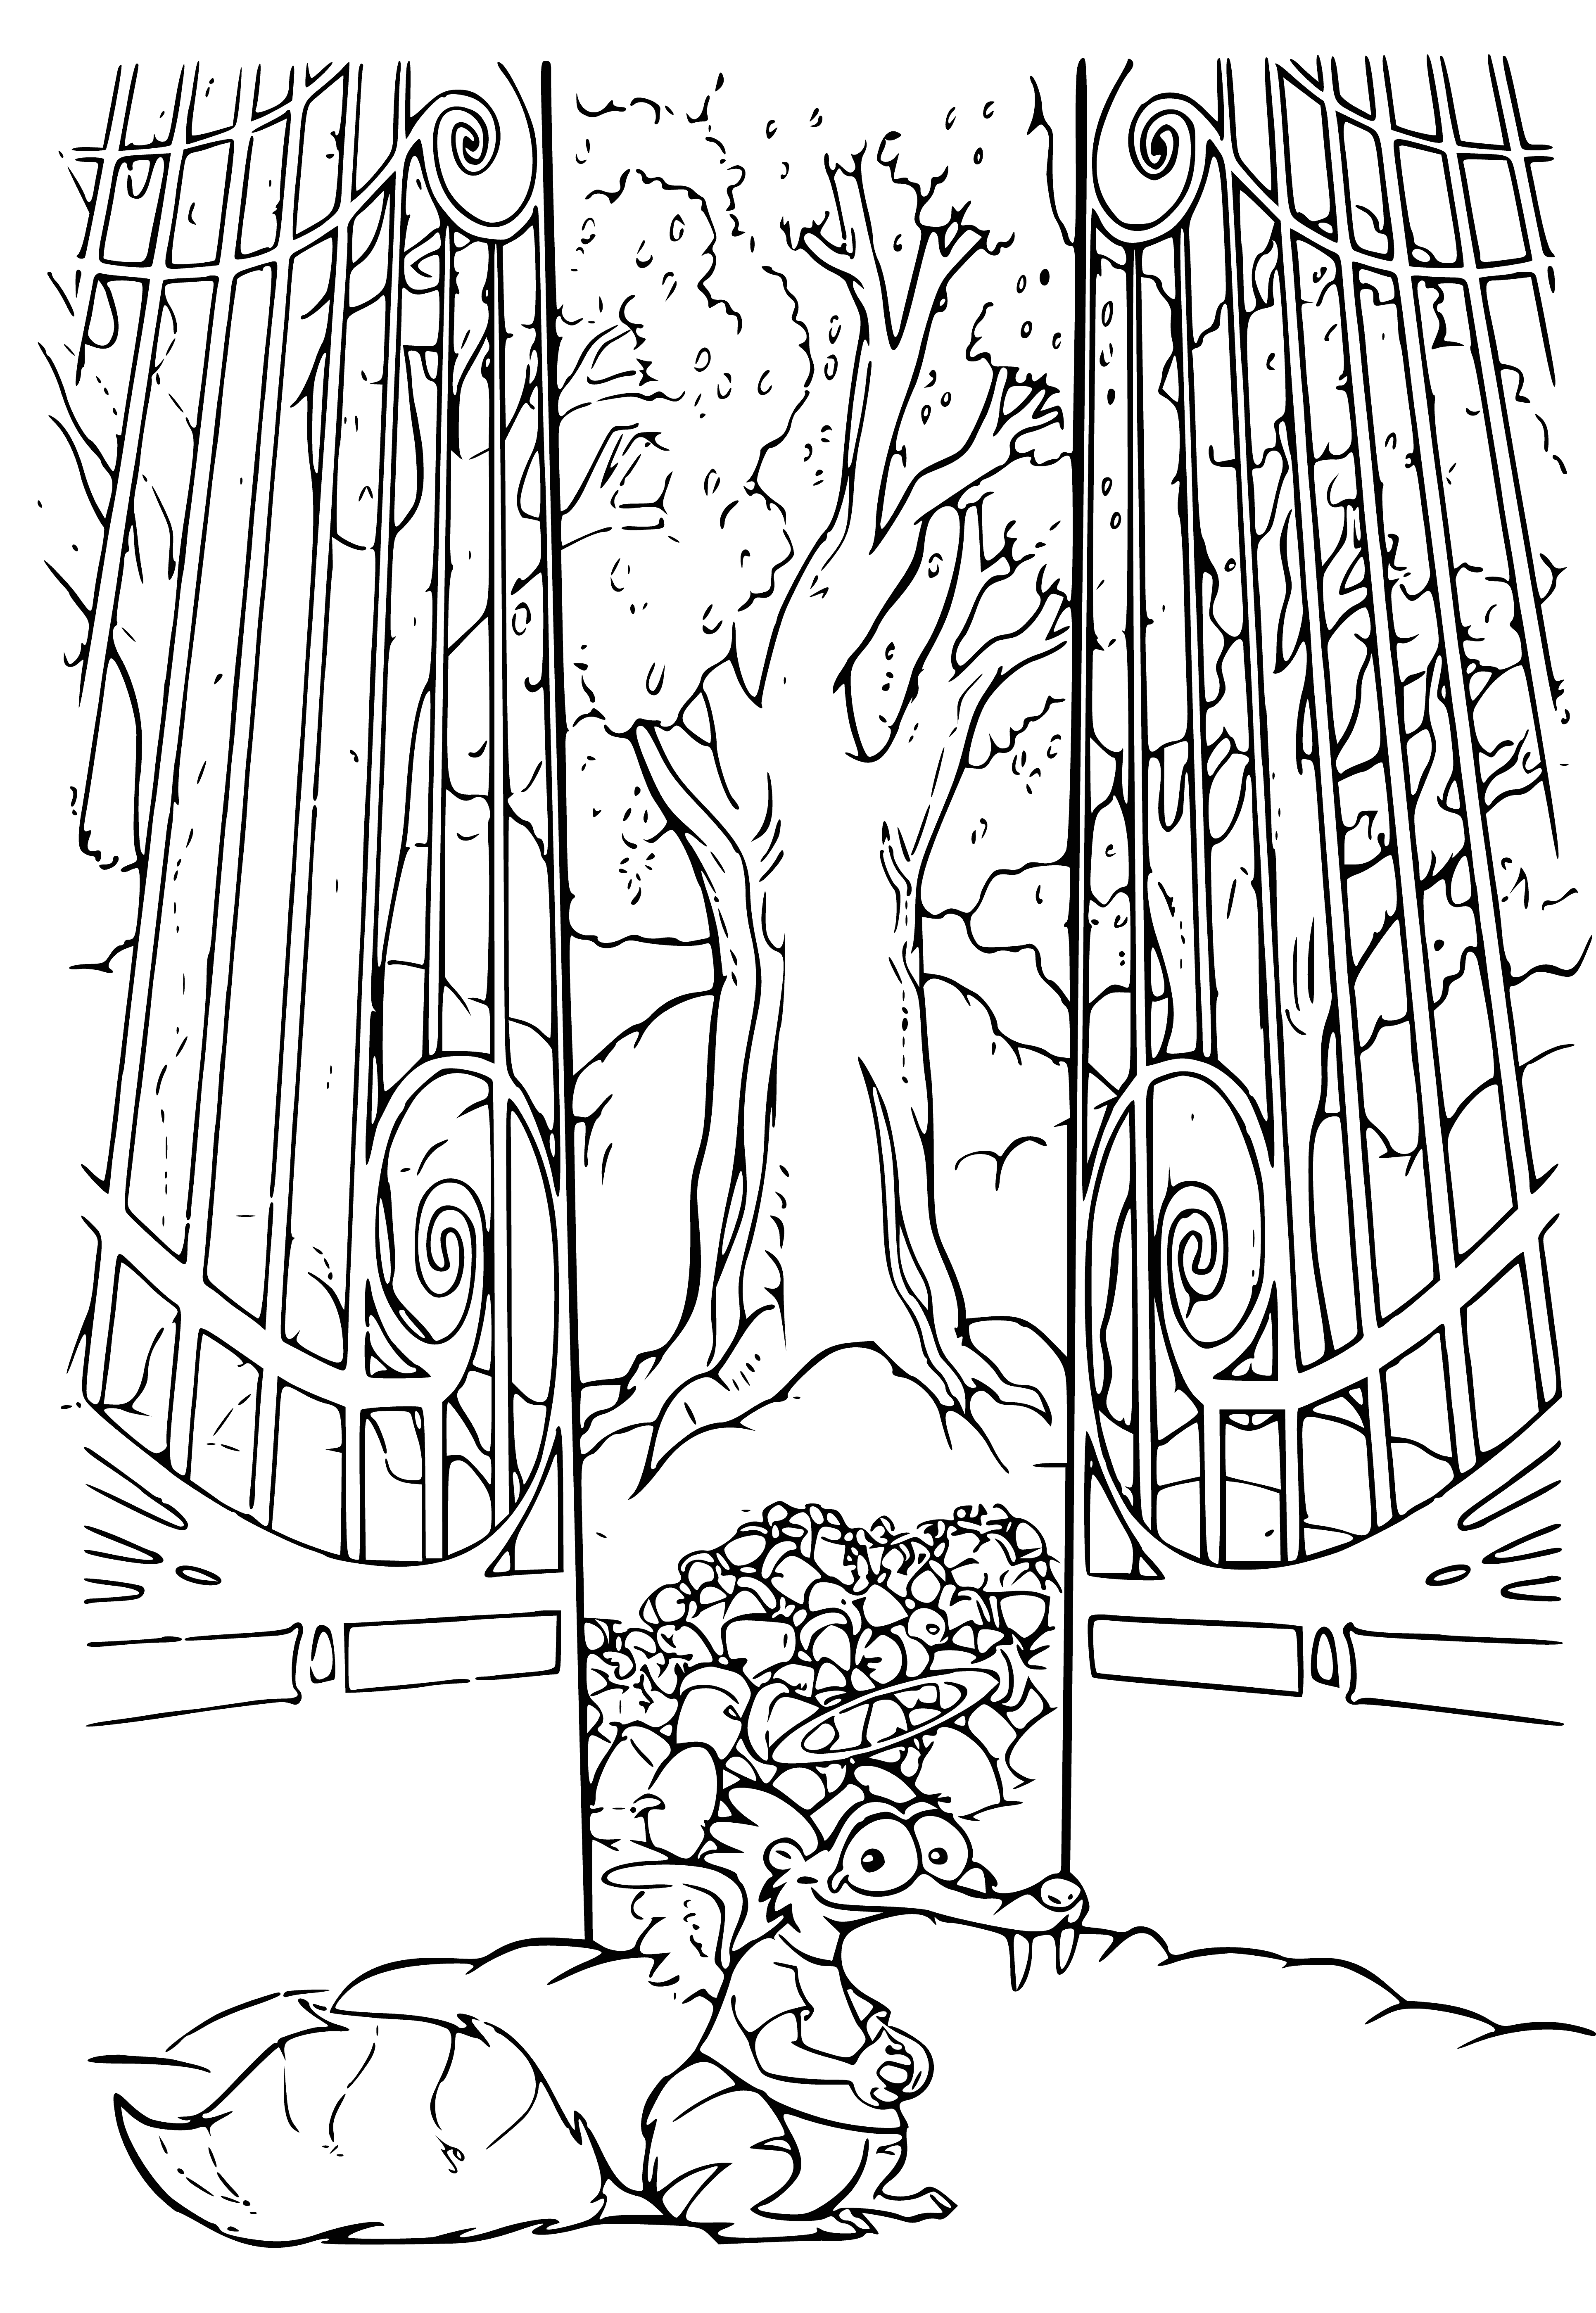 coloring page: A snowy paradise with a small squirrel carrying a big acorn, trees frosted with icicles, and a pale blue sky with a sunny morning.